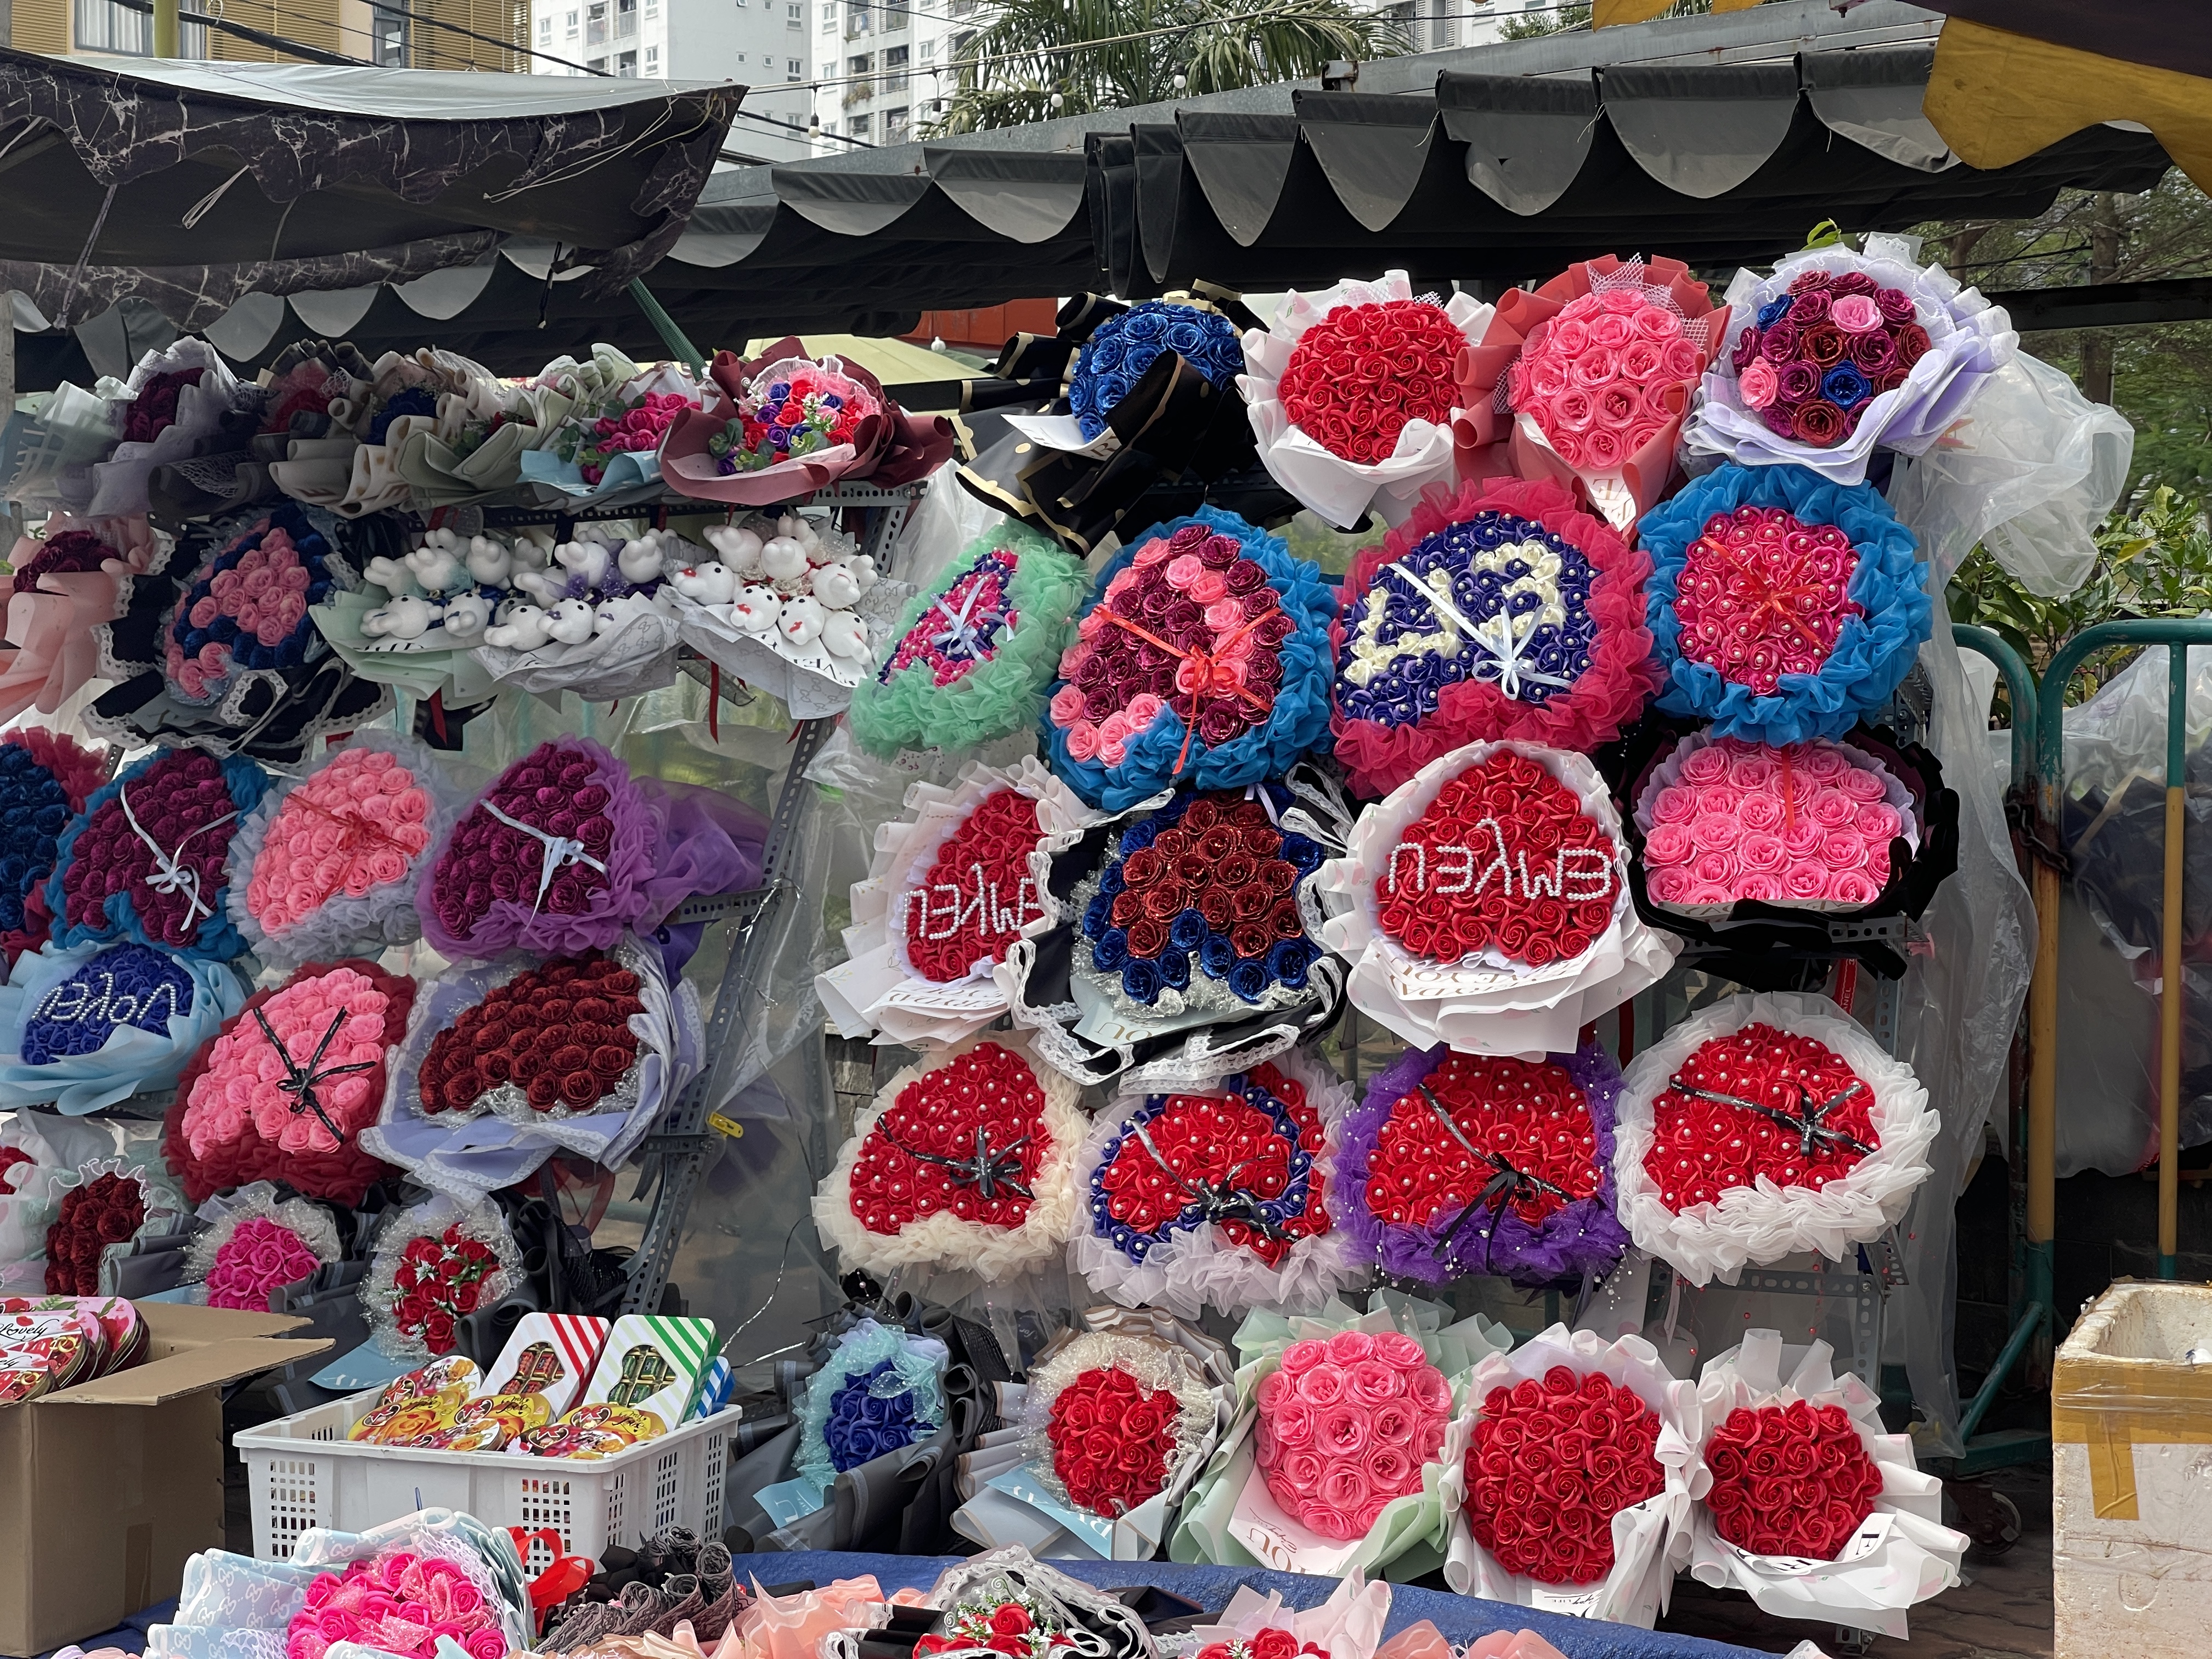 Bouquets of artificial flowers are sold ahead of Valentine's Day on a sidewalk in District 12, Ho Chi Minh City. Picture taken on February 13, 2023. Photo: Dong Nguyen / Tuoi Tre News